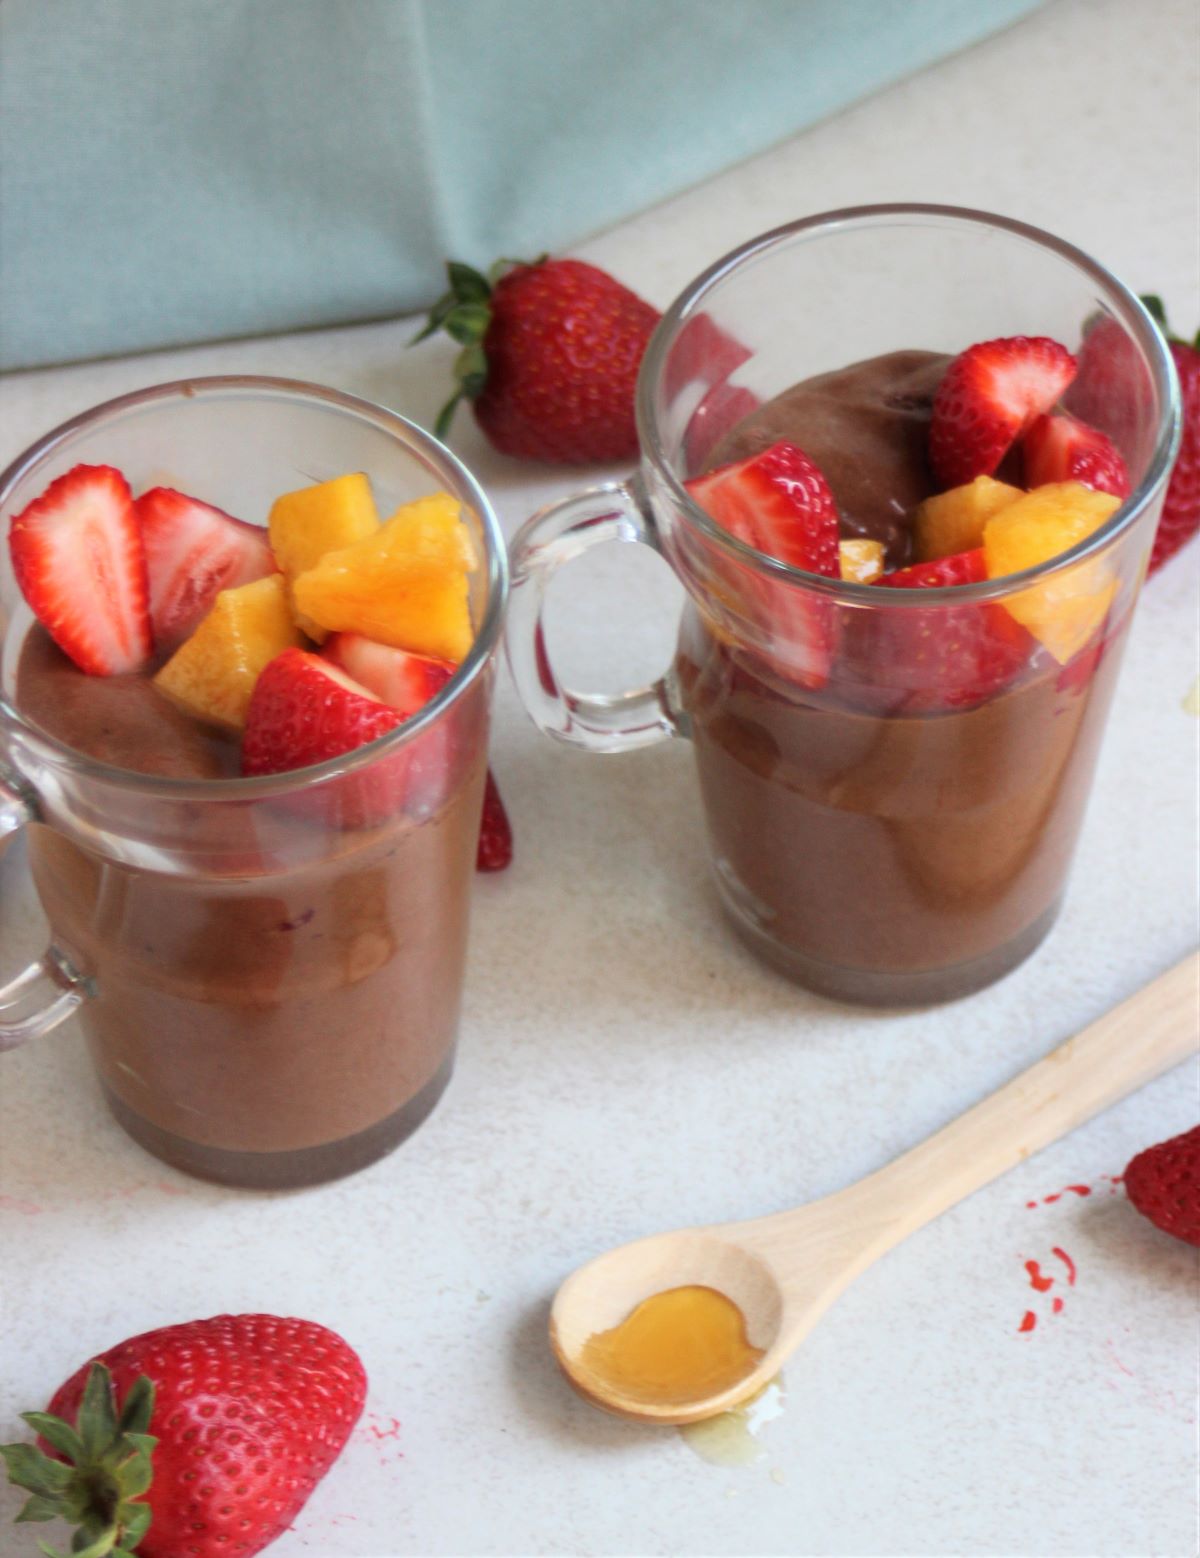 Glass cups with chocolate mousse, strawberries, and peaches. Strawberries on the side..